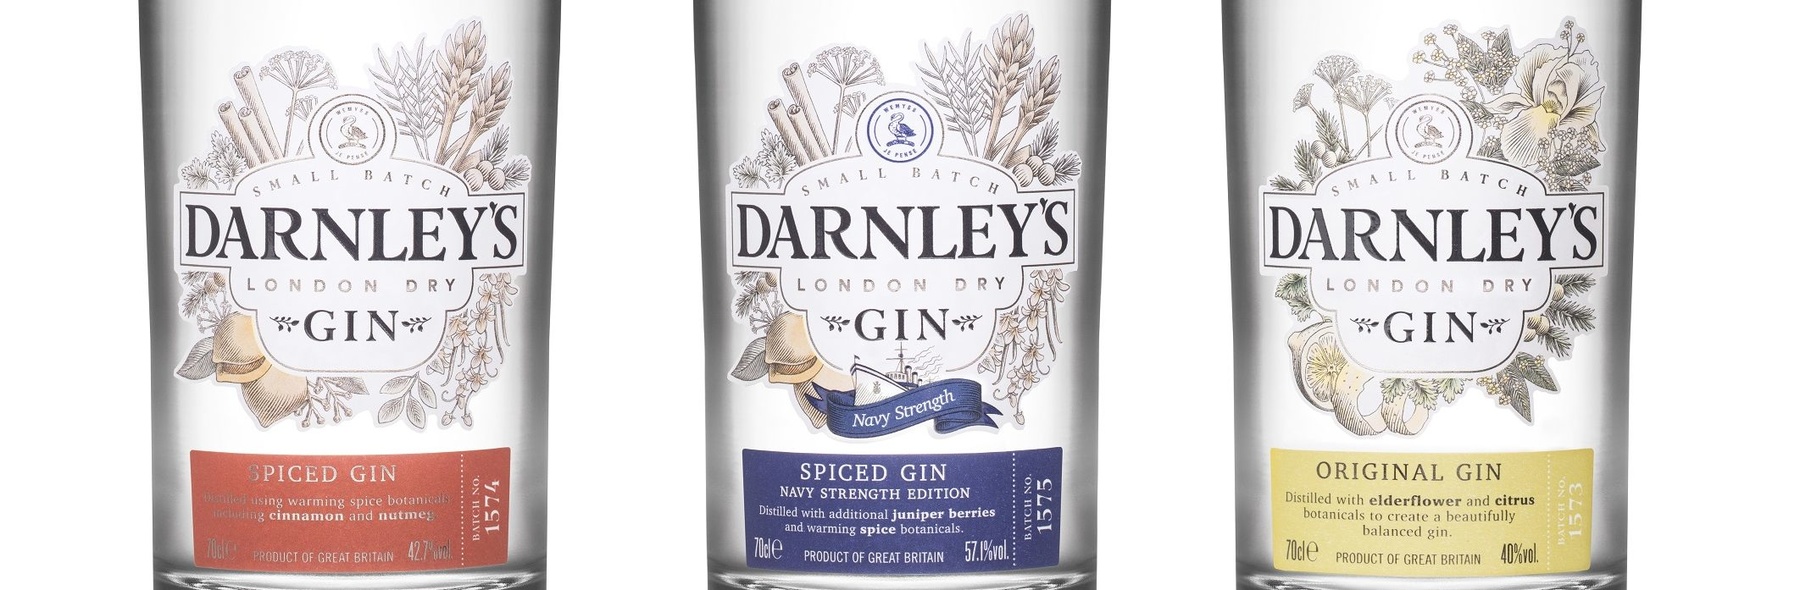 Darnleys_Gin_Group copy_V3 mid res